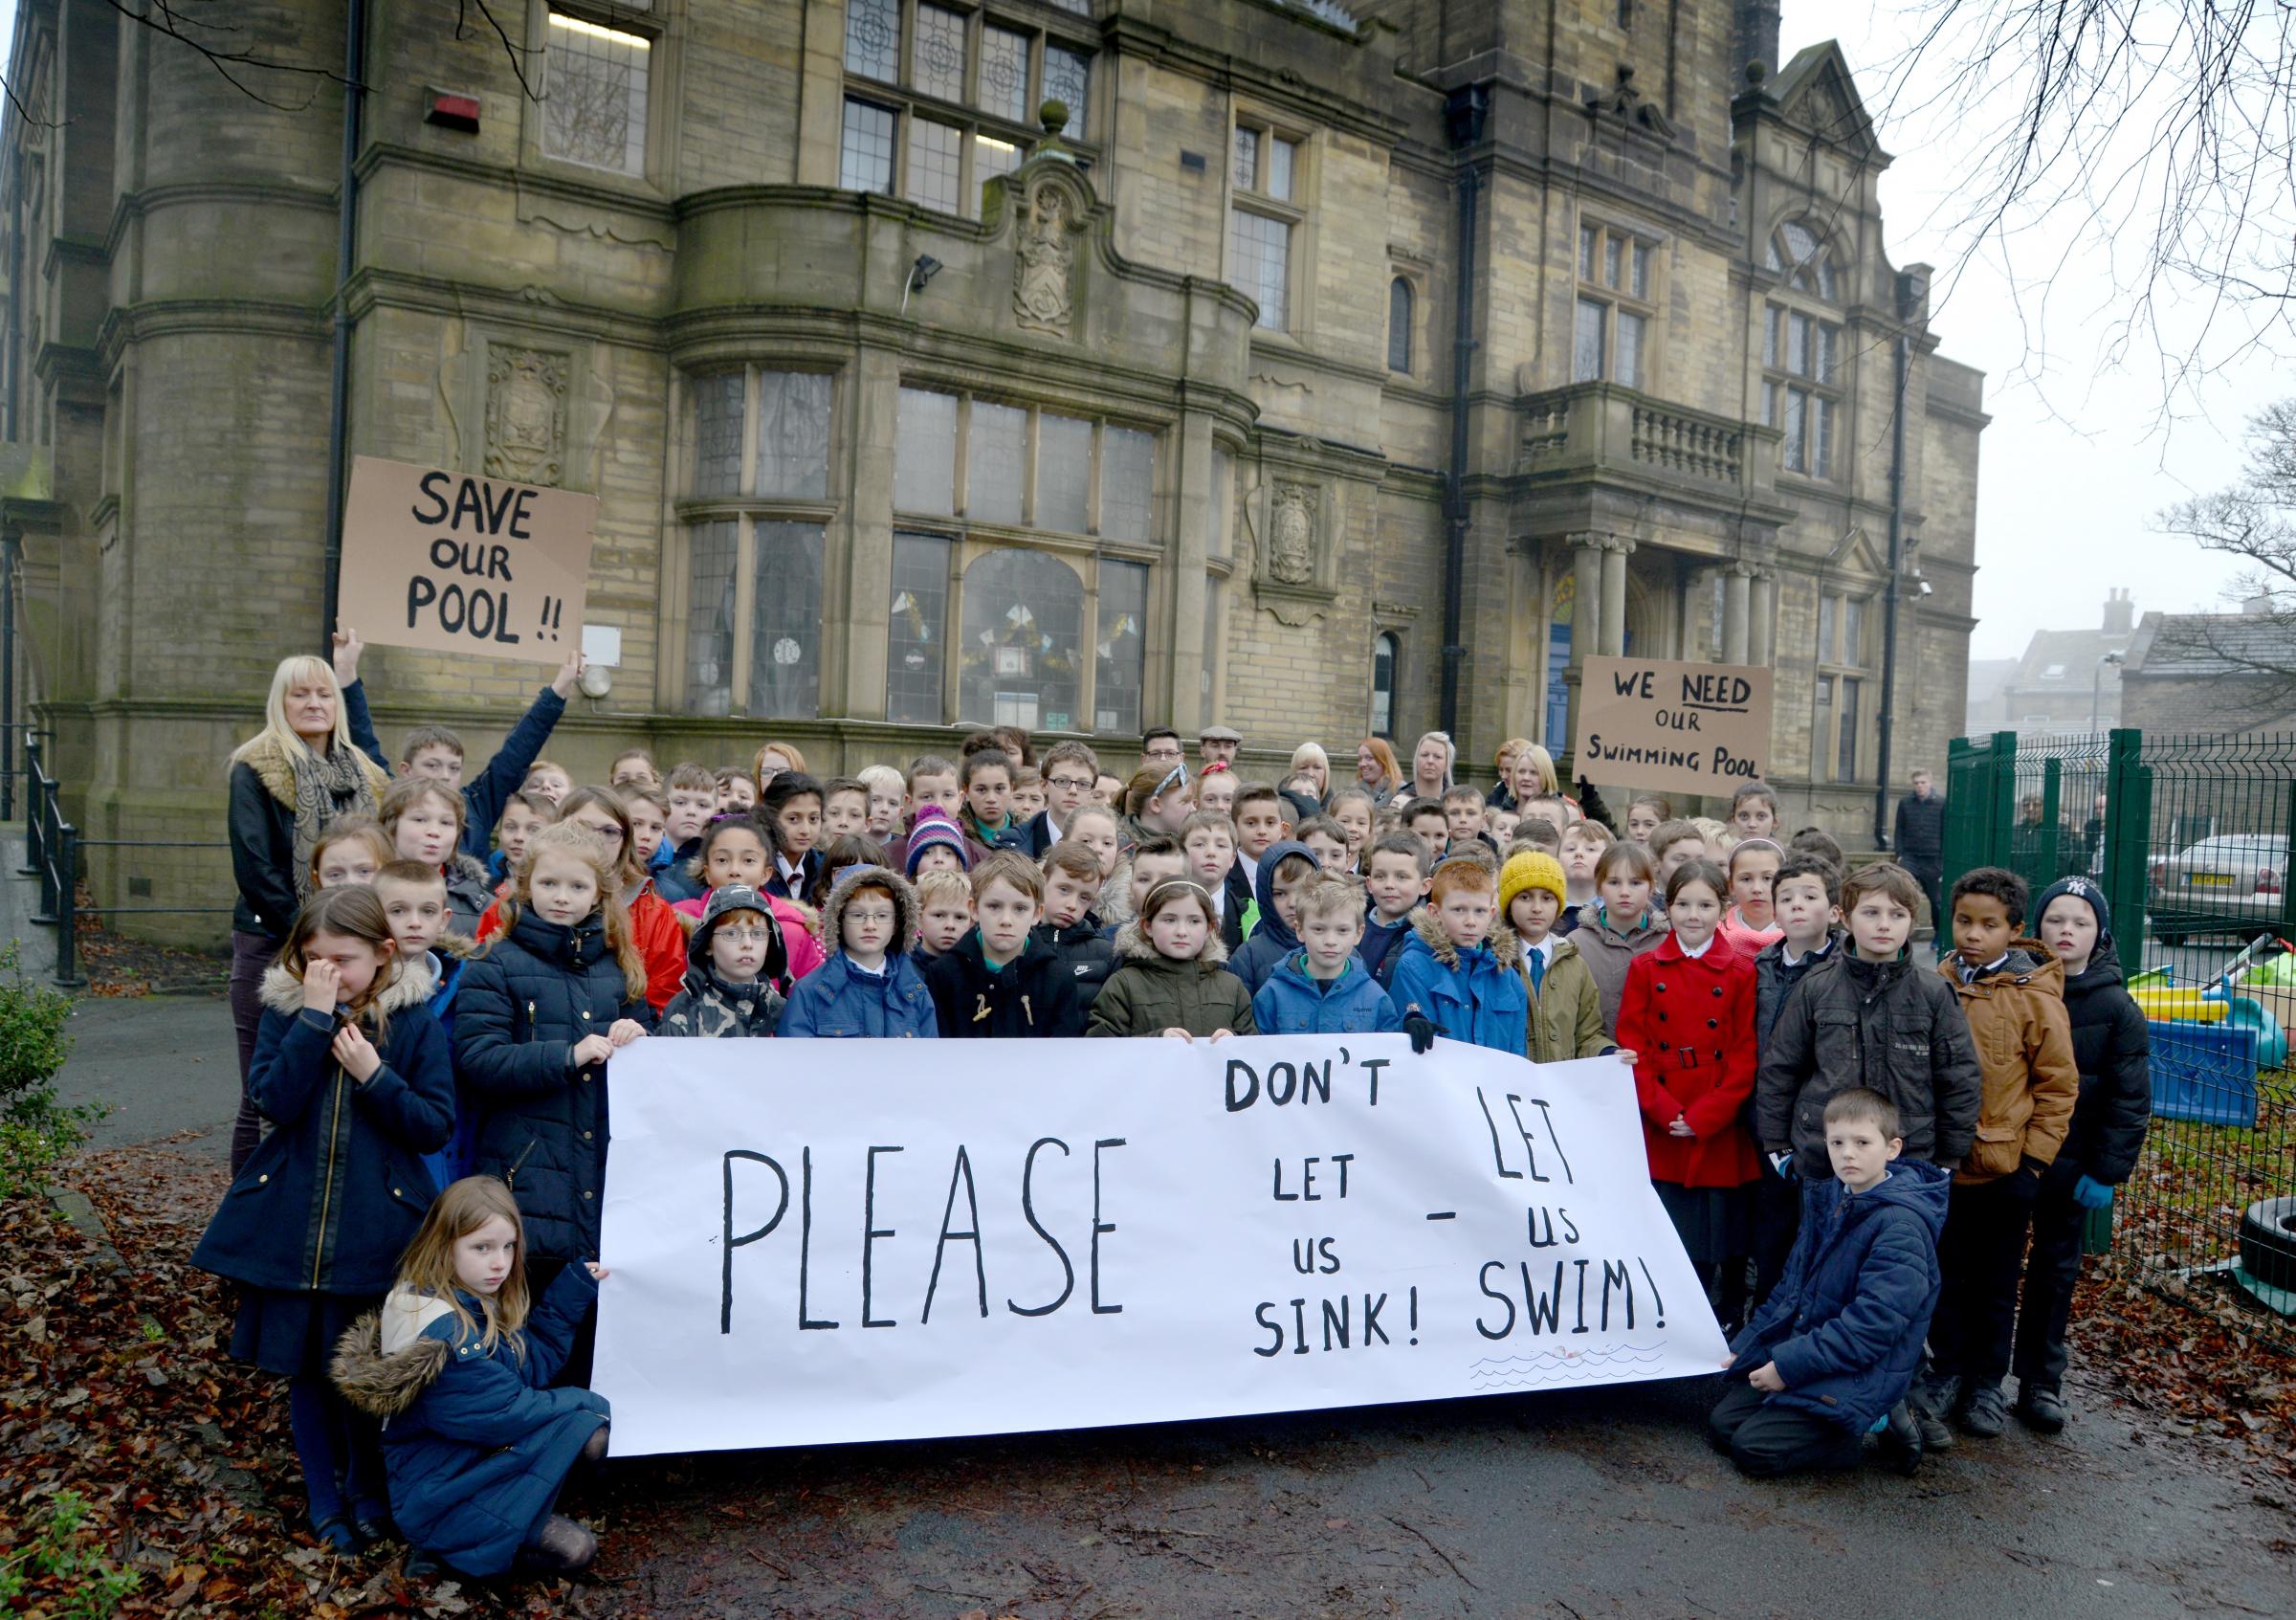 Campaigners hope swimming pool can be saved as community asset - Bradford Telegraph and Argus